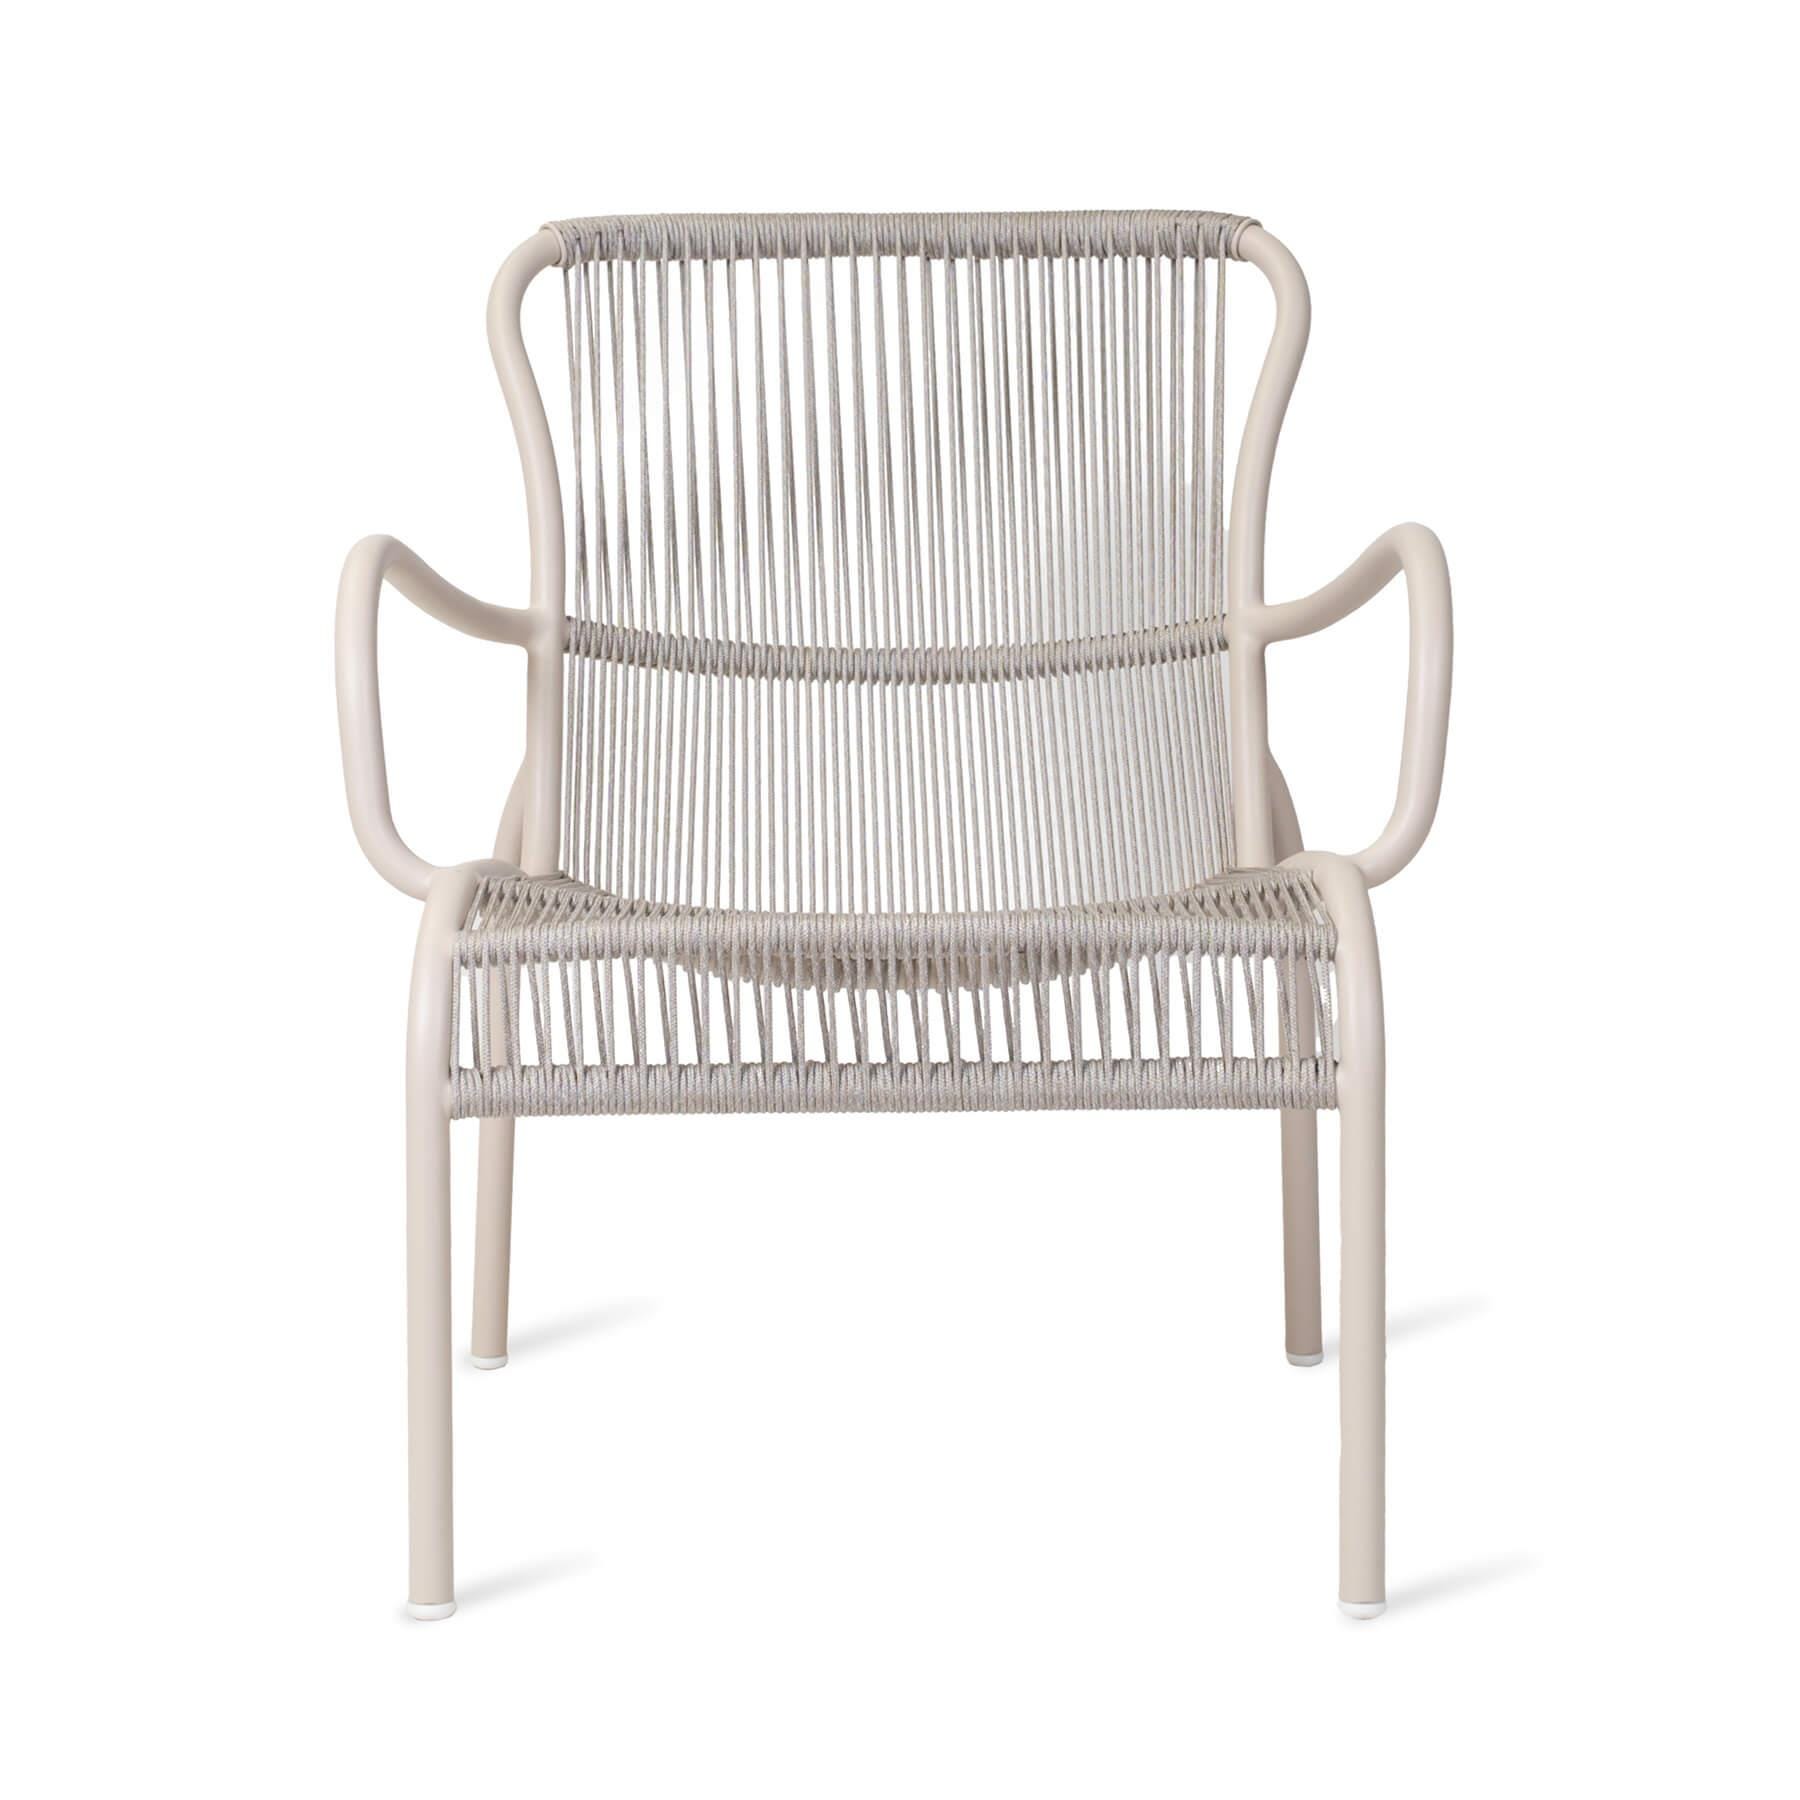 Vincent Sheppard Loop Garden Lounge Chair Dune White Designer Furniture From Holloways Of Ludlow